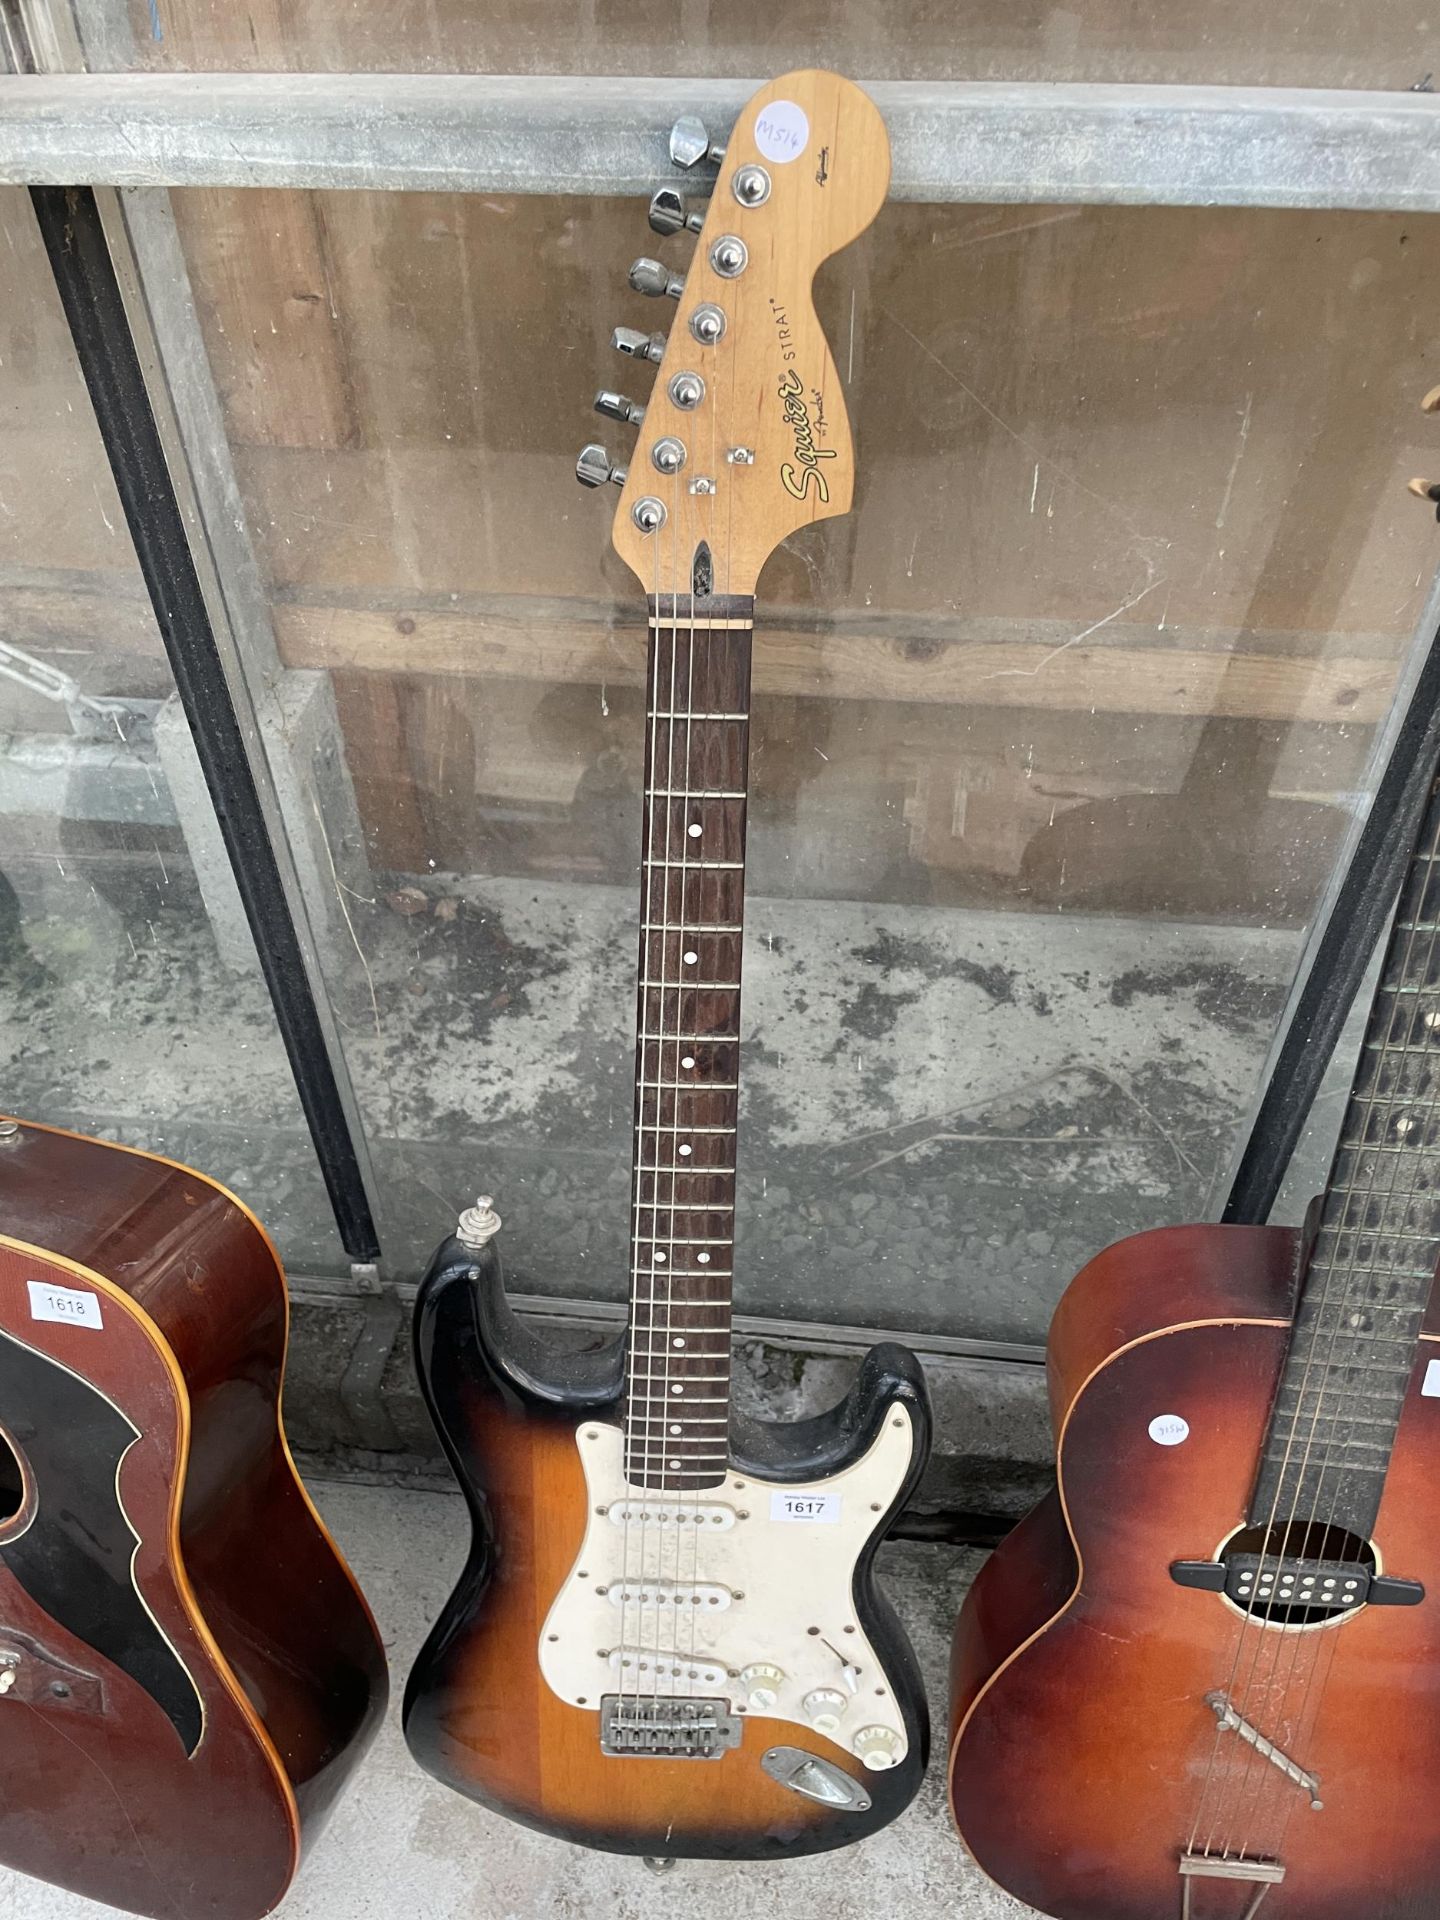 A SQUIRE STRAT FENDER ELECTRIC GUITAR